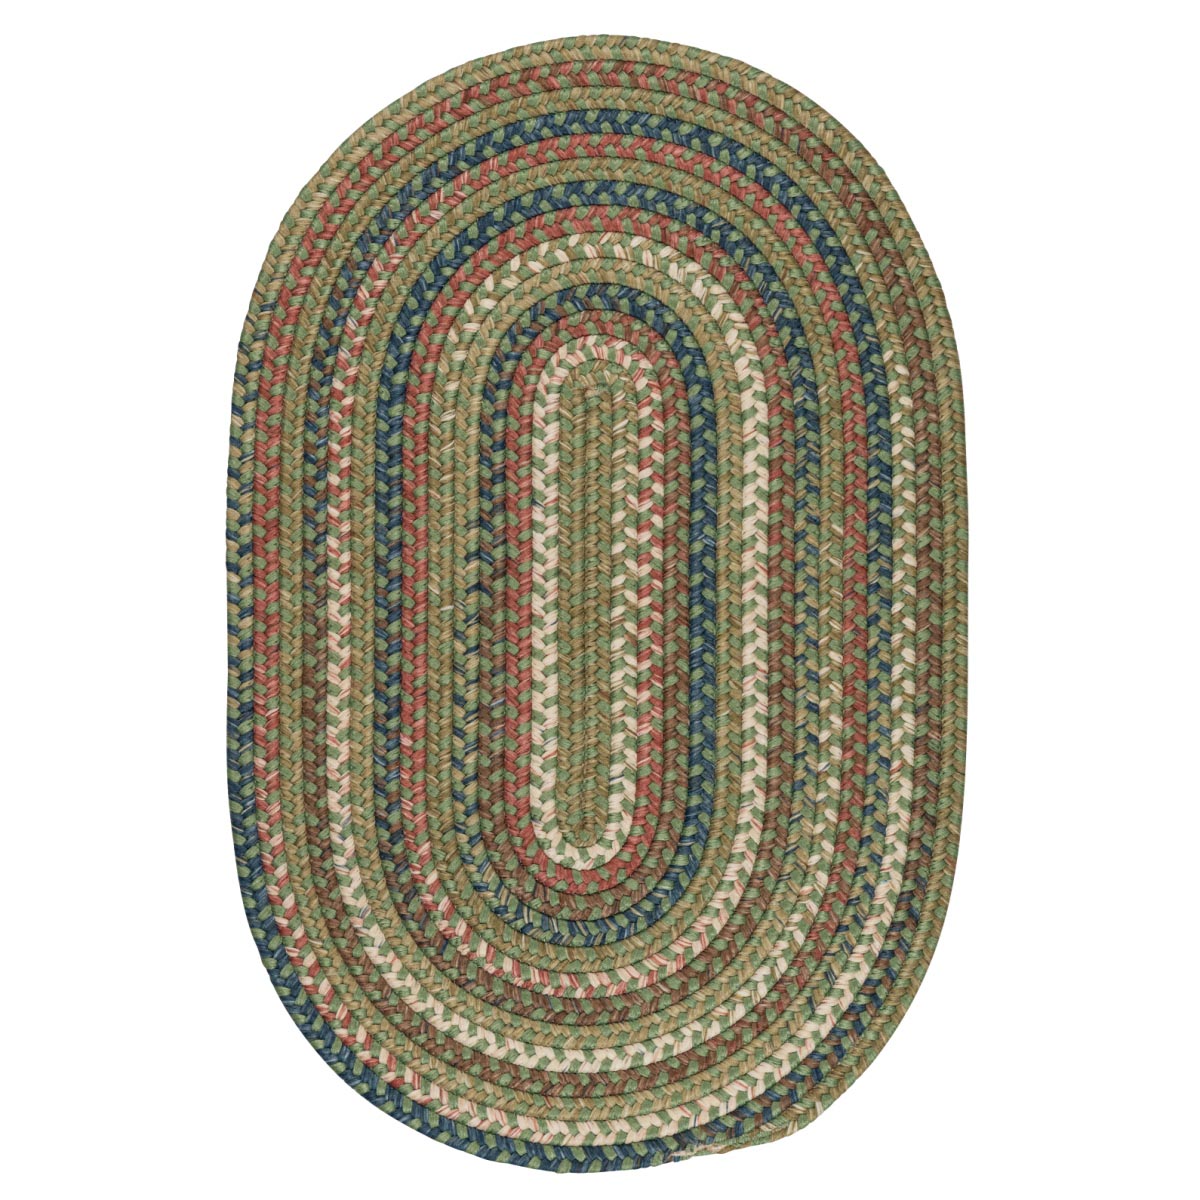 Cedar Cove Olive Outdoor Braided Oval Rugs